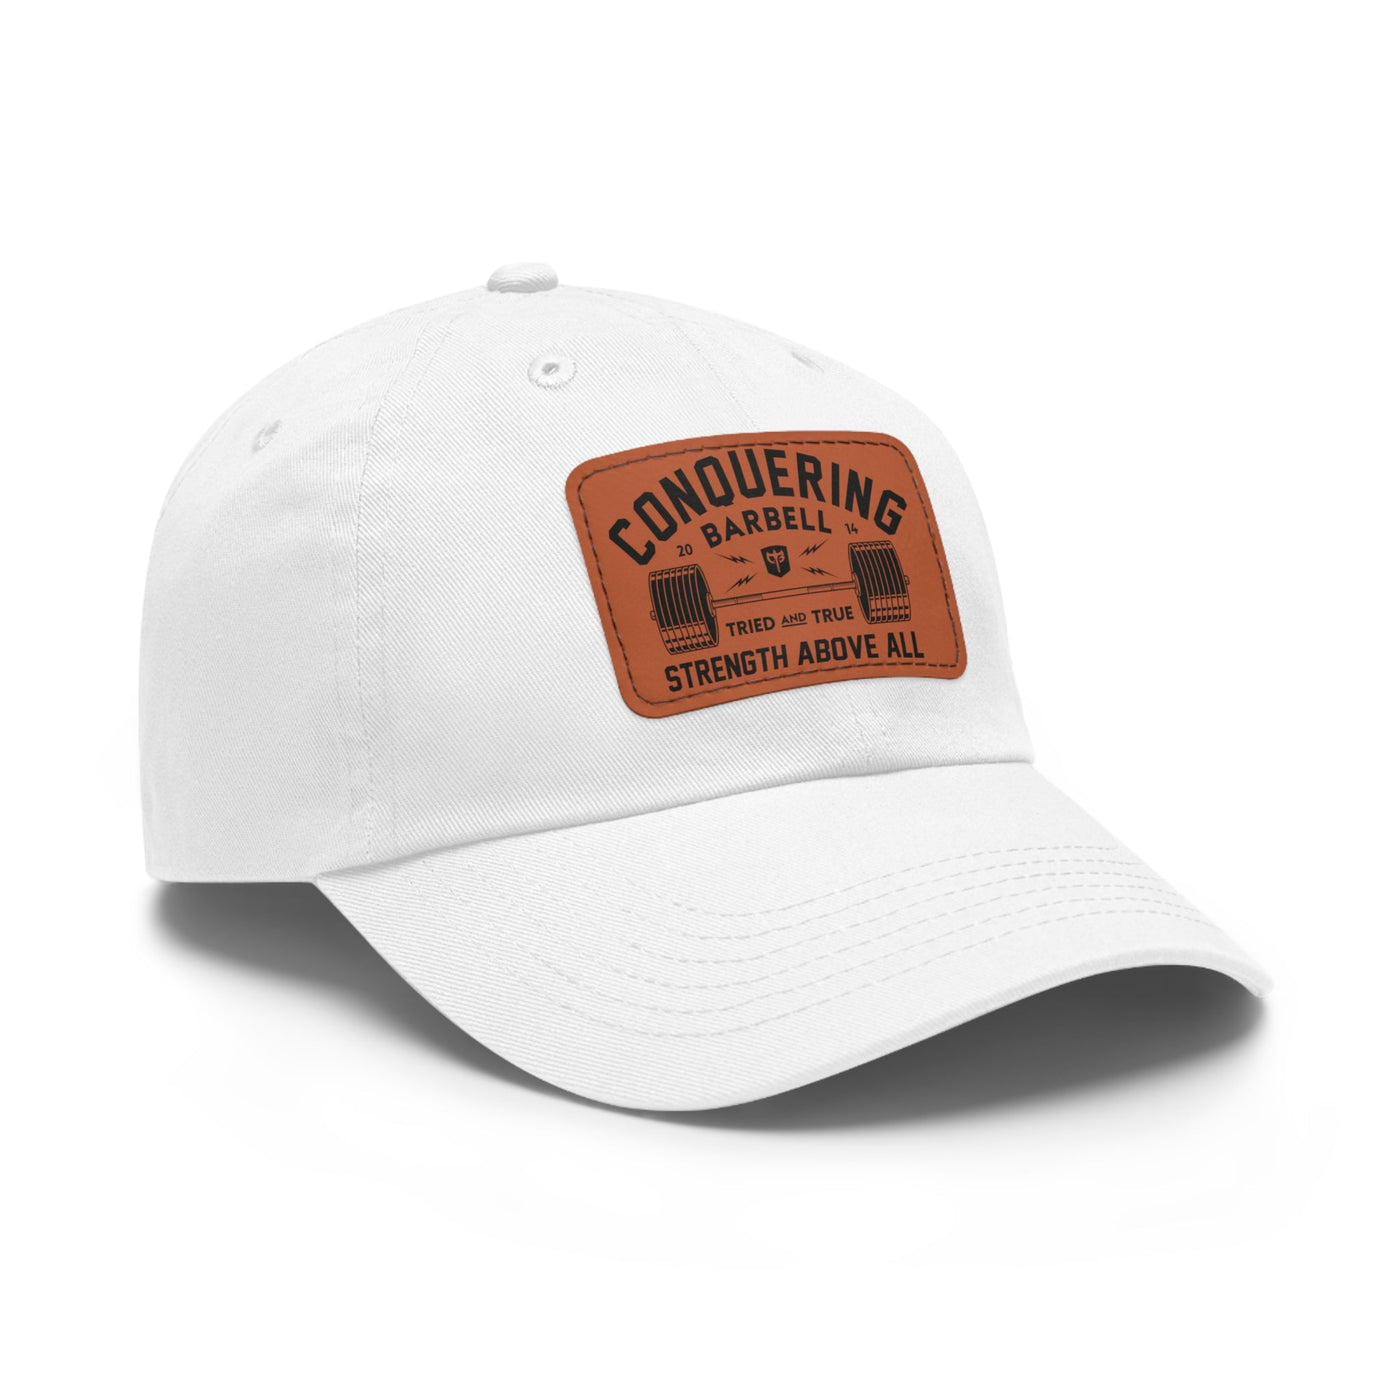 Strength Above All - Dad Hat - Conquering Barbell